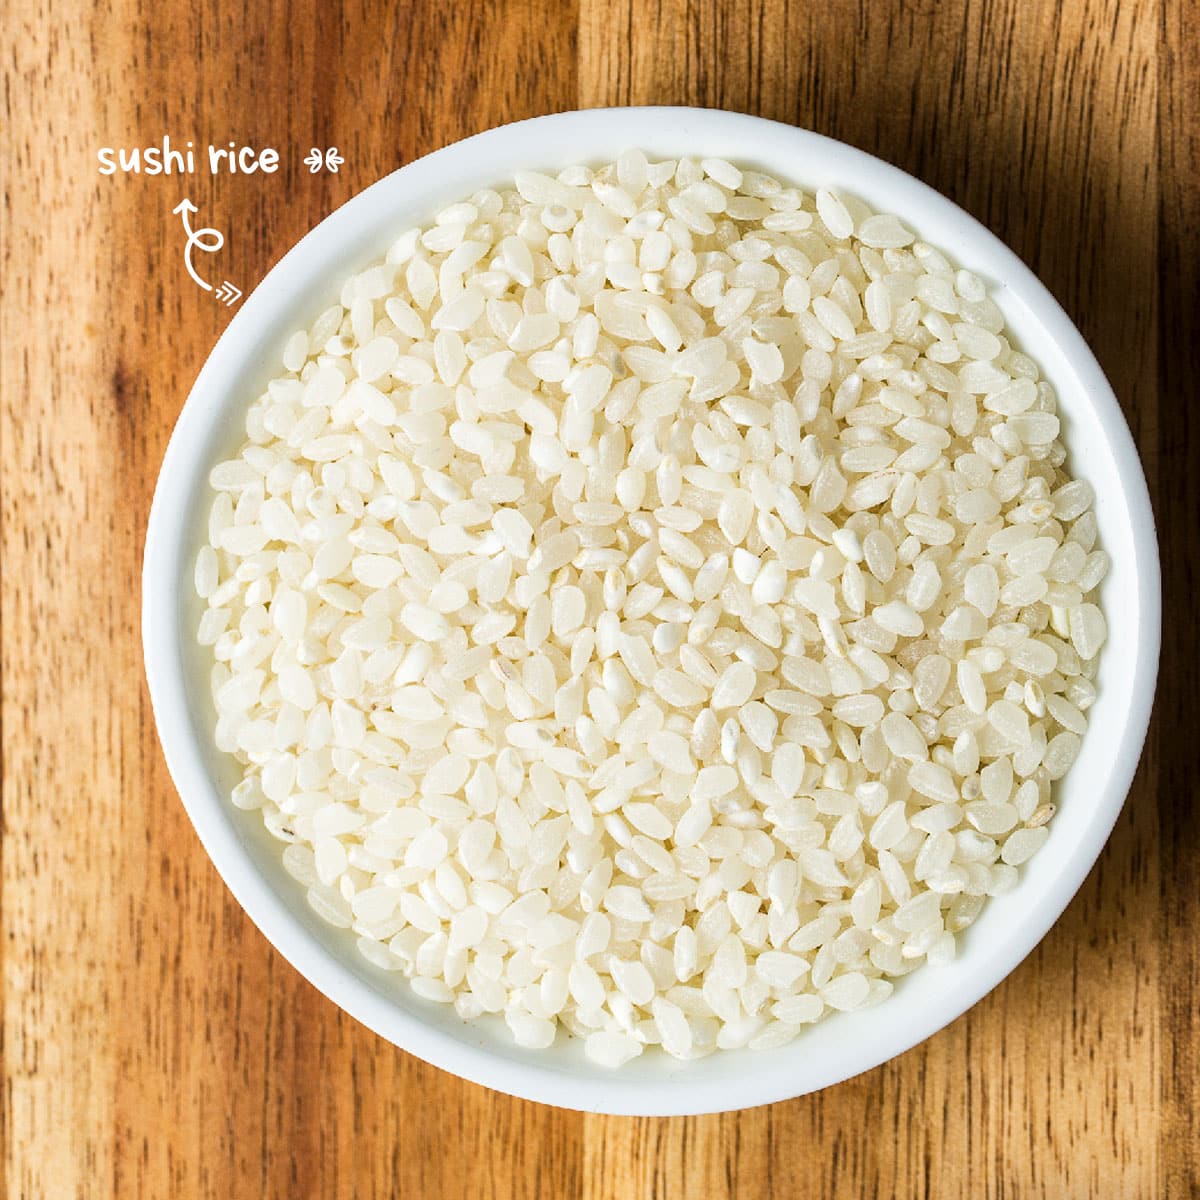 Unlike regular white rice, sushi rice is steamed and is much stickier, making it ideal for rolling sushi rolls. If you can't find Japanese short-grain white rice, other types, such as medium-grain rice, can work in a pinch.